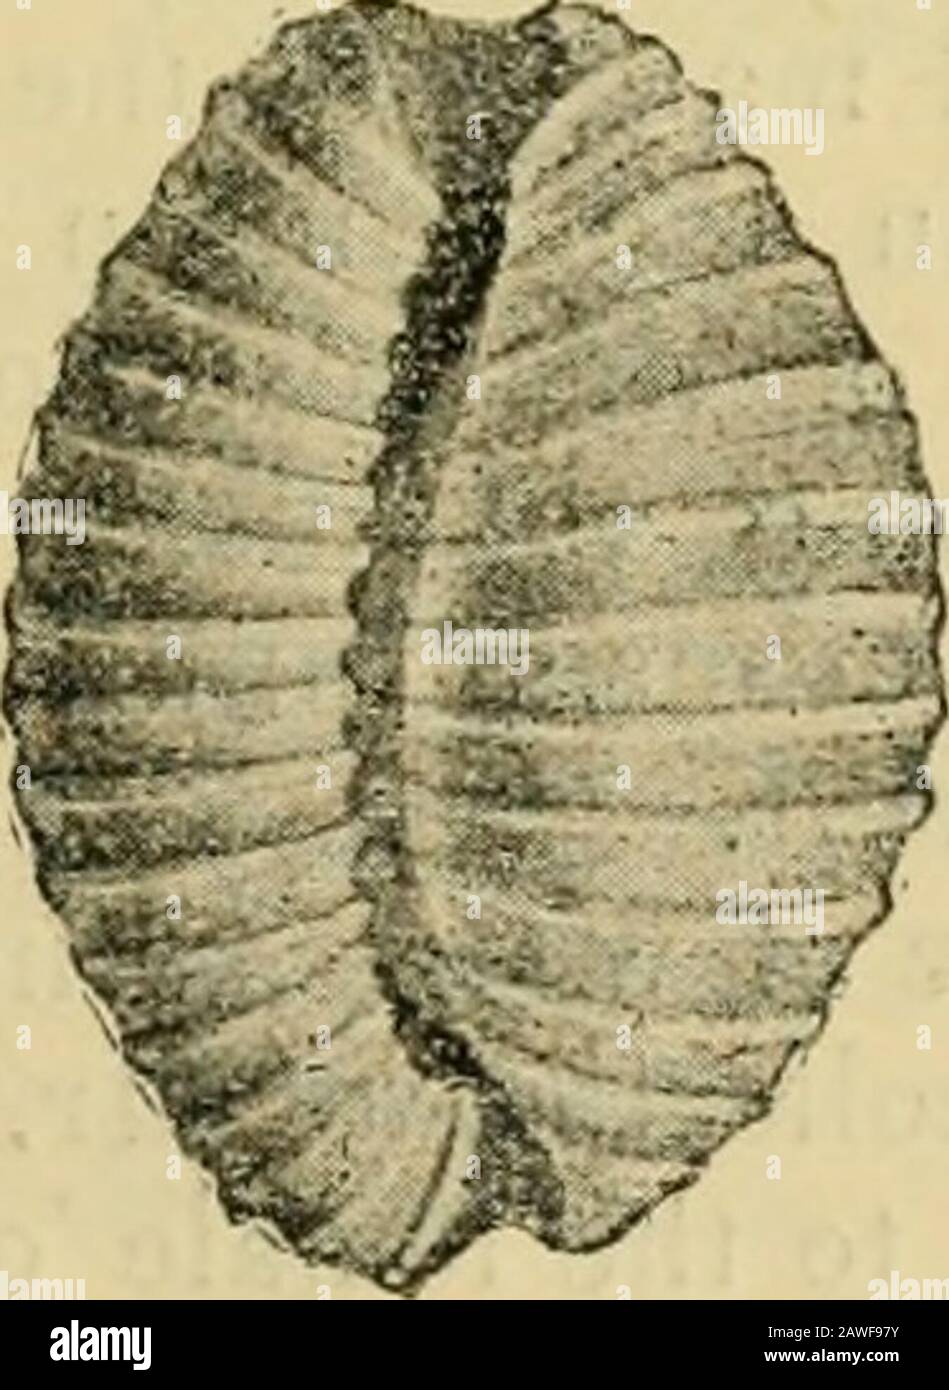 The Annals and magazine of natural history; zoology, botany, and geology . + NT Vt^. Cyprcea Buttoni. But few species are very comparable with this: acutidentata,Gask., may be akin, but the type is lost, and I have neverseen anything but the original insufficient description ; pauci- Ann. & Mag. N. Hist. Ser. 7. Vol vi. 14 210 On a new Species o/ Papilio. lirata, Sowb., possesses a well-defined sulcus, and the ribsseem more acute than are those of Buttoni; candidula, Gask.,is larger and whiter, with more frequent costse ; producta,Gask., as its name implies, is produced at its extremities, and Stock Photo